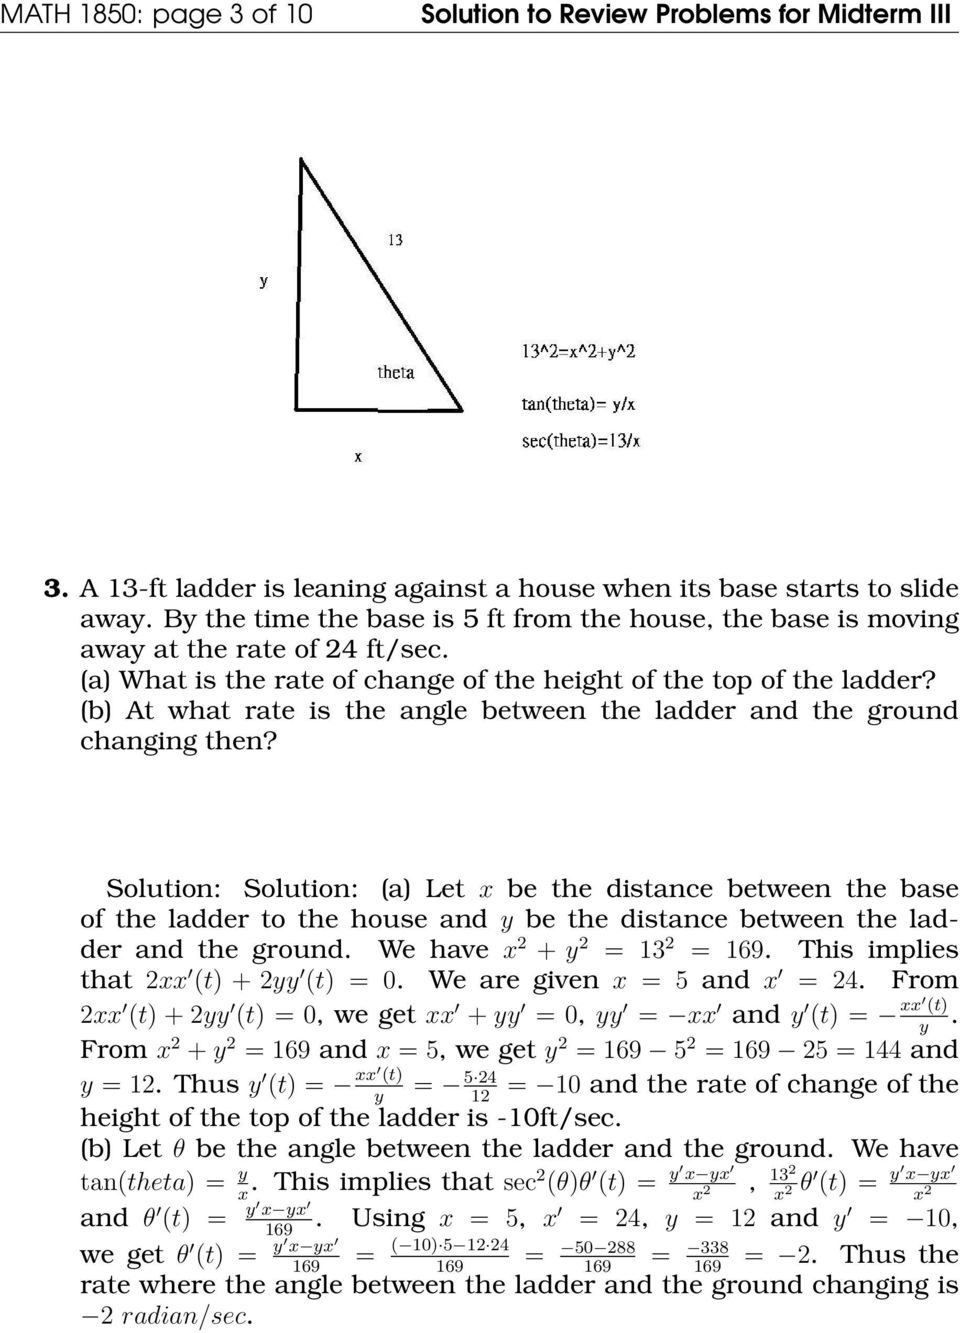 (b) At what rate is the angle between the ladder and the ground changing then?